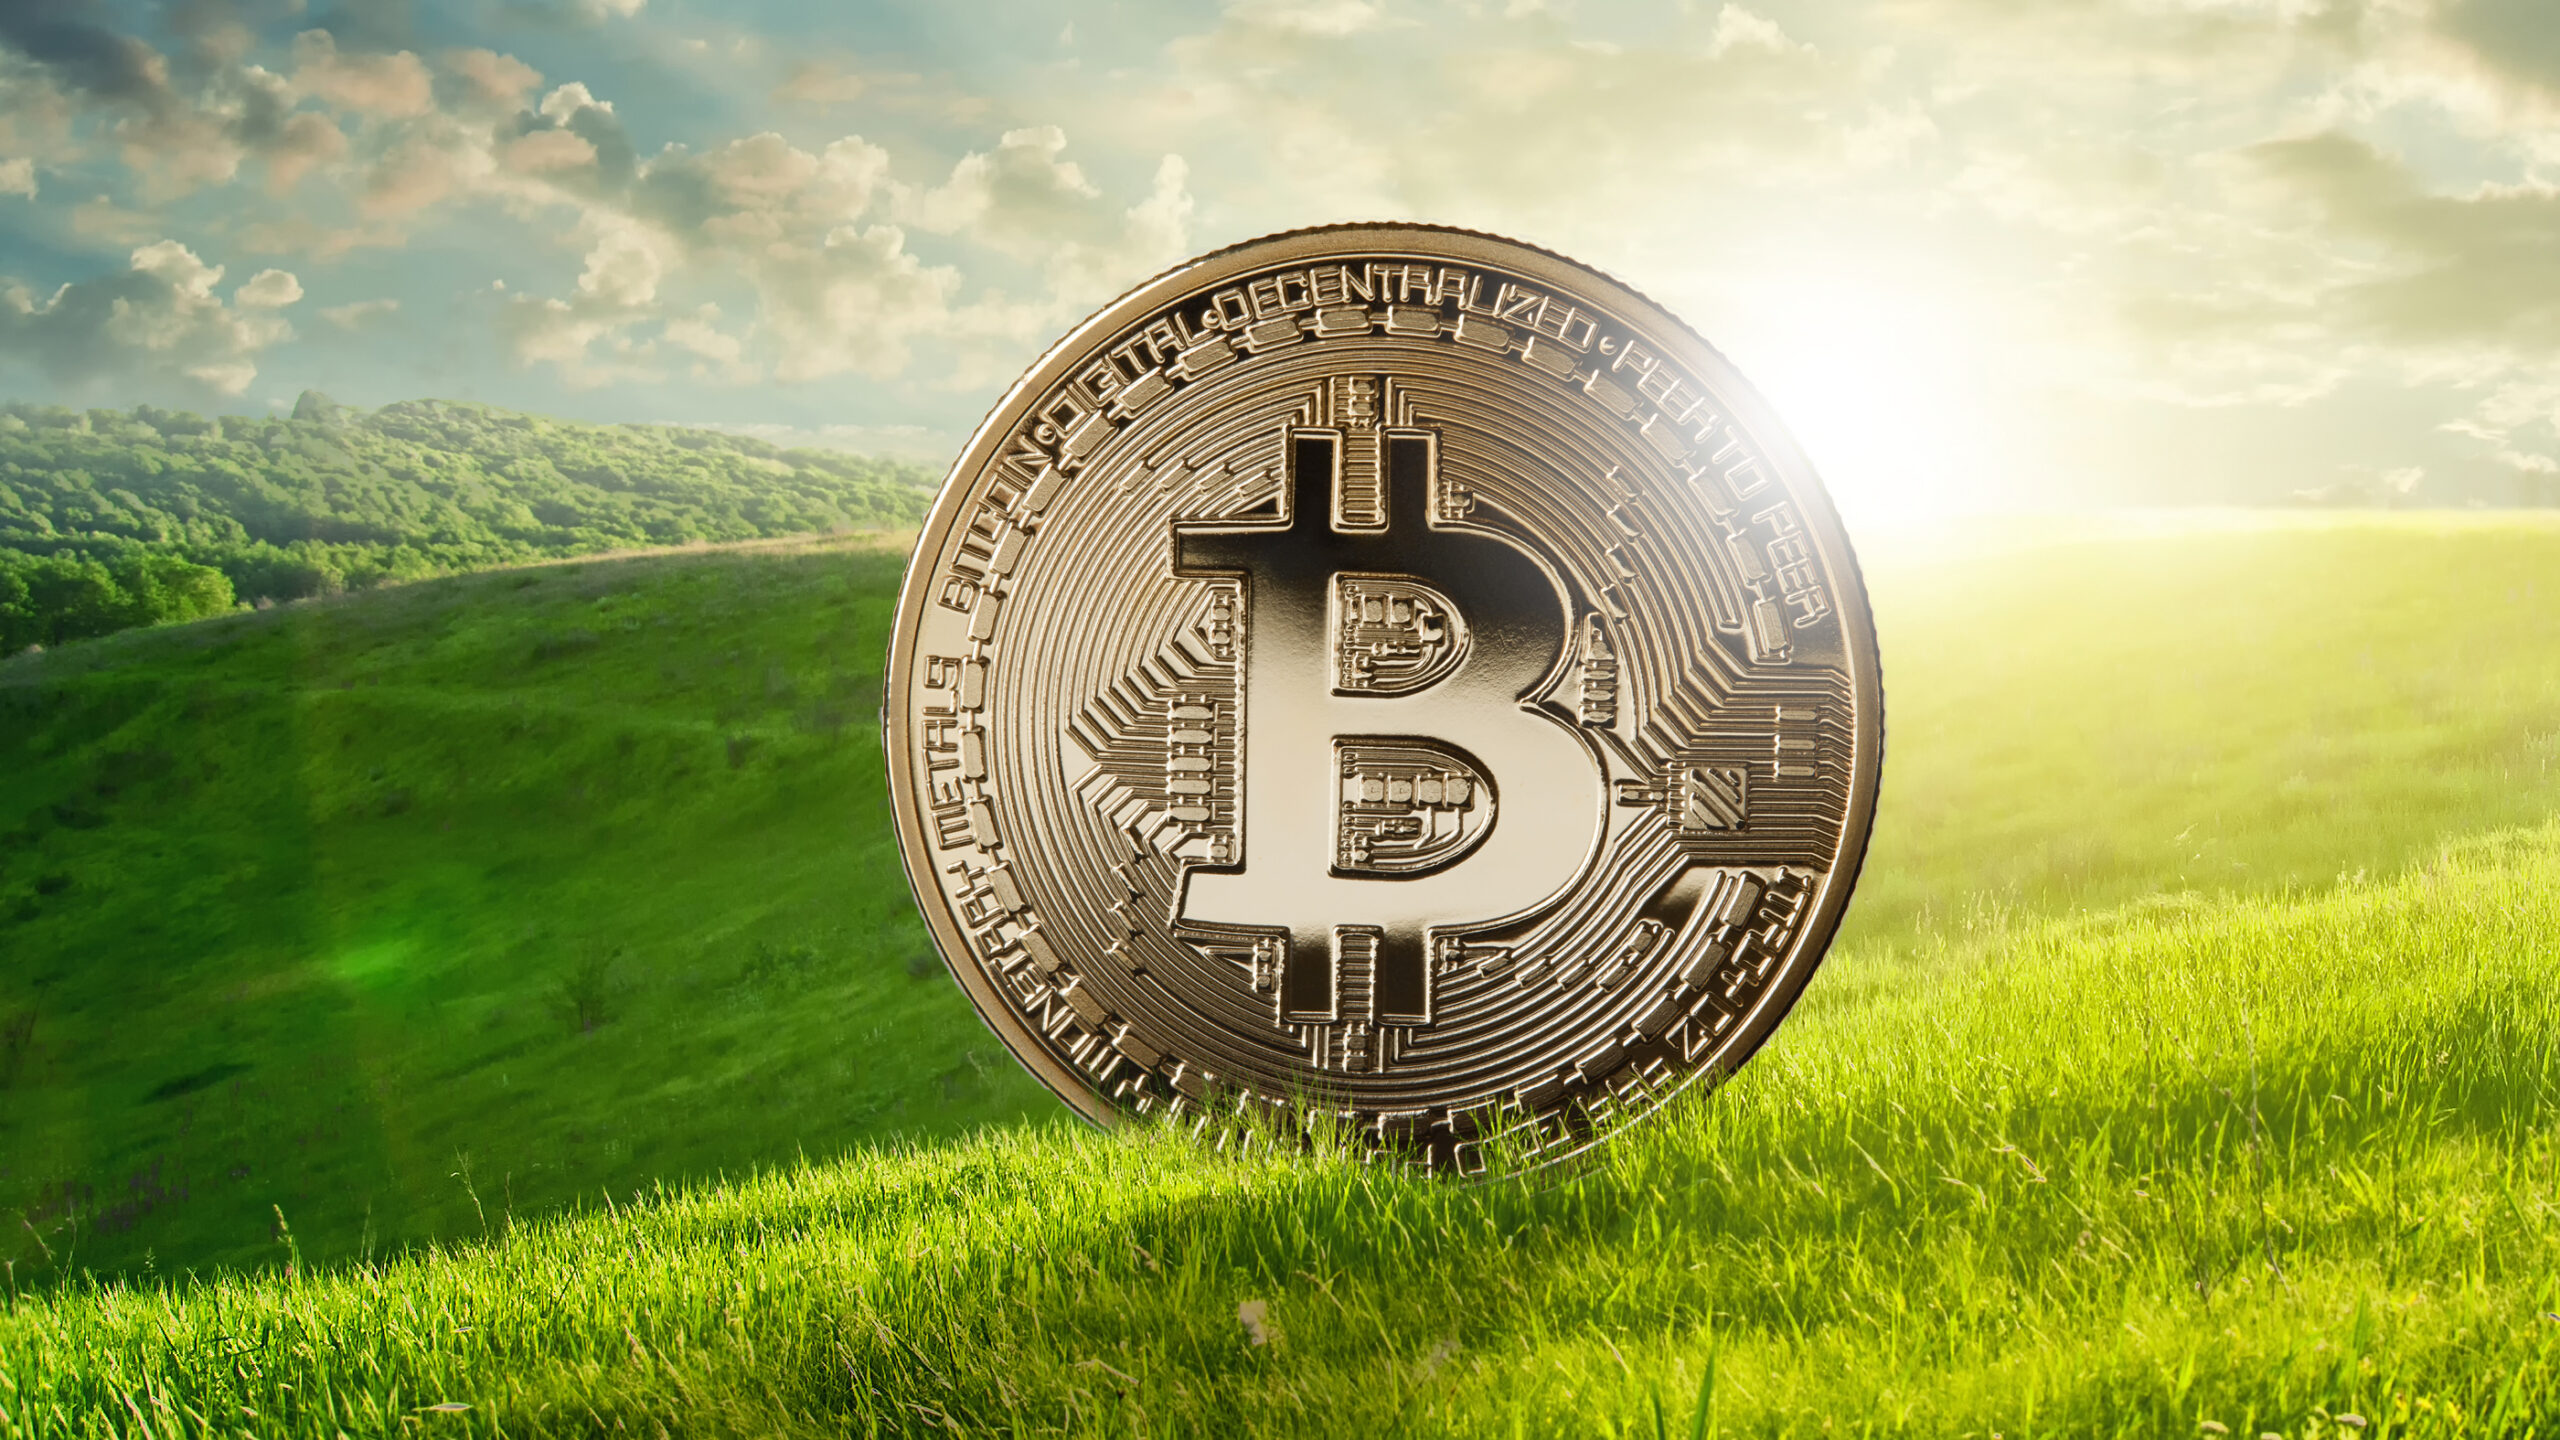 Greenidge Vows to Pursue More Carbon-Neutral Bitcoin Mining Operations